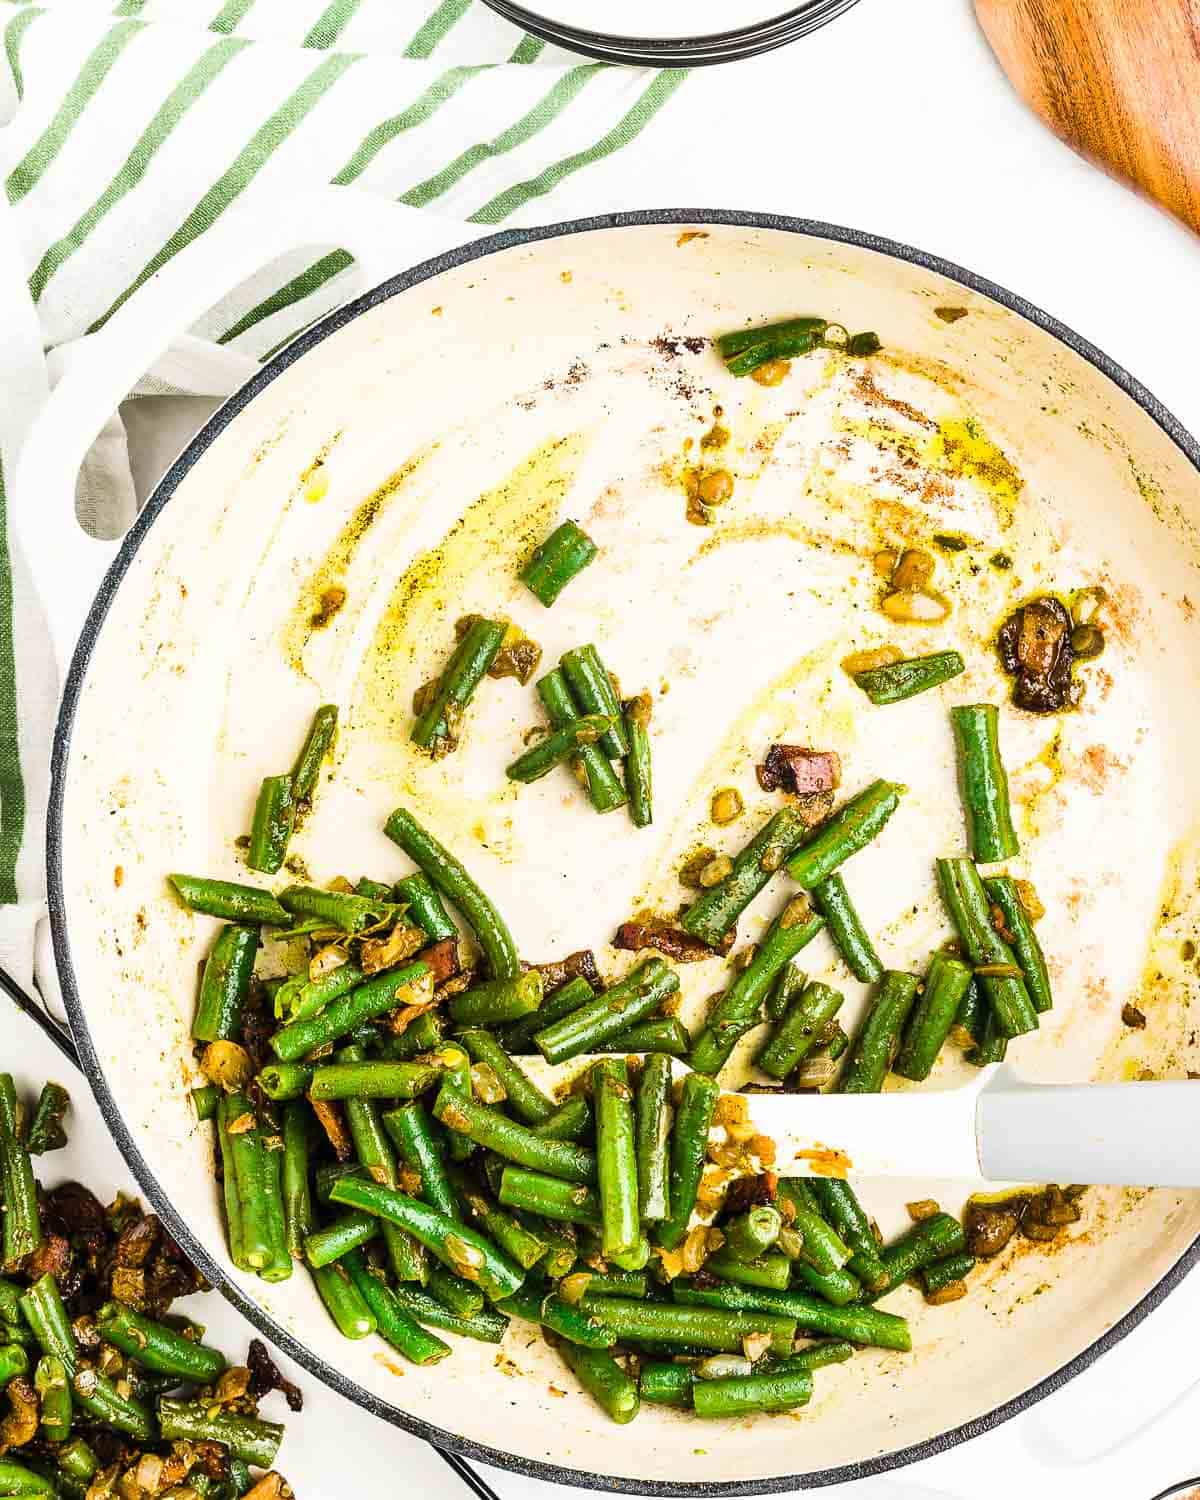 A half-full serving dish of leftover green beans.